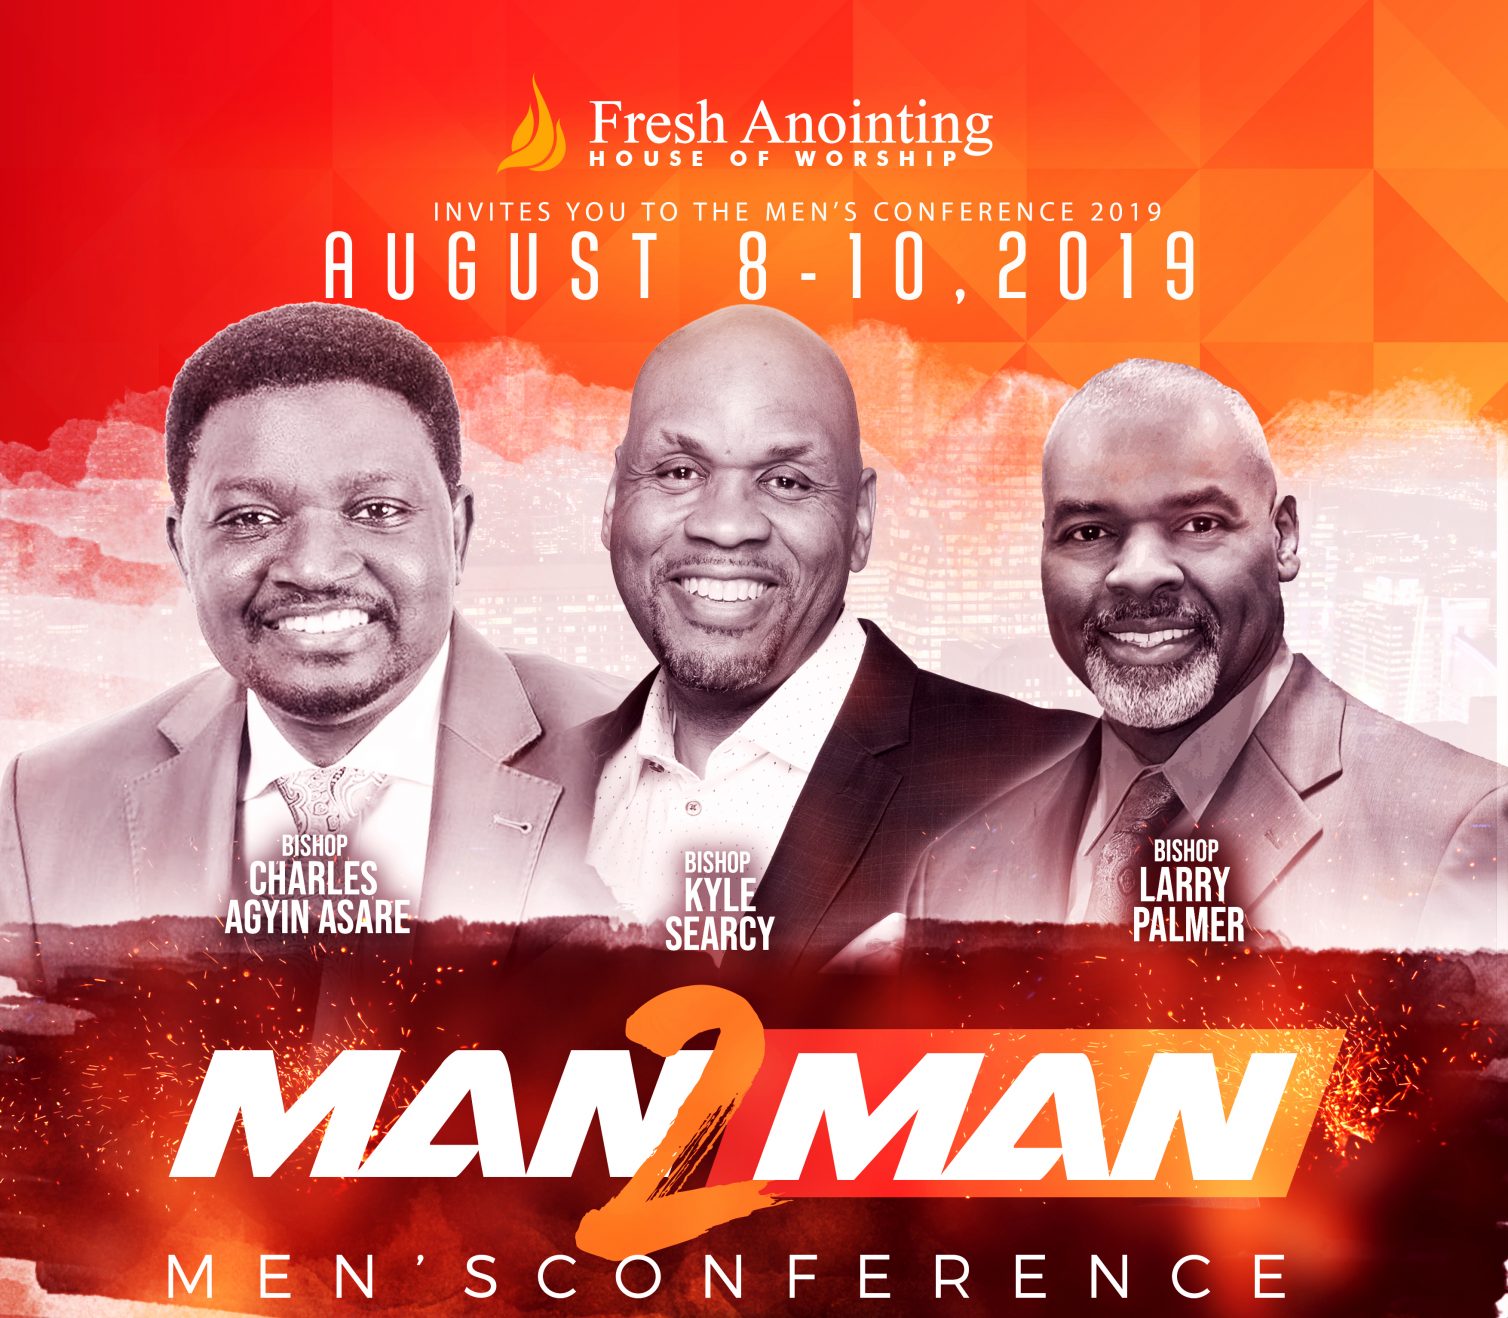 Man 2 Man Conference Fresh Anointing House of Worship